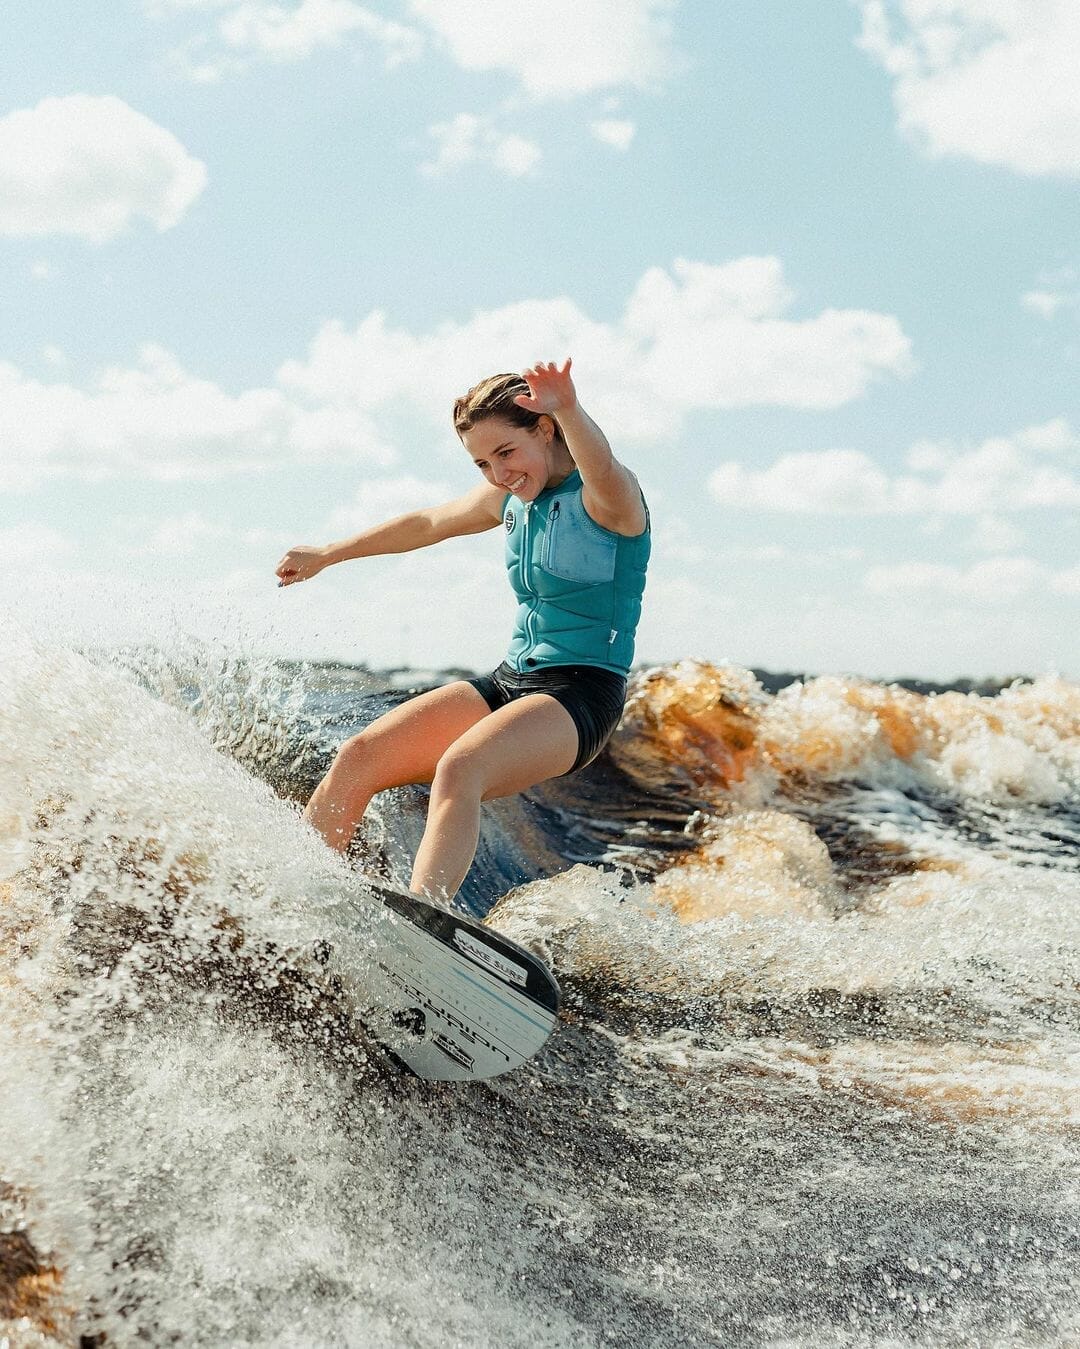 A young woman surfing a wave on a wakesurf board.